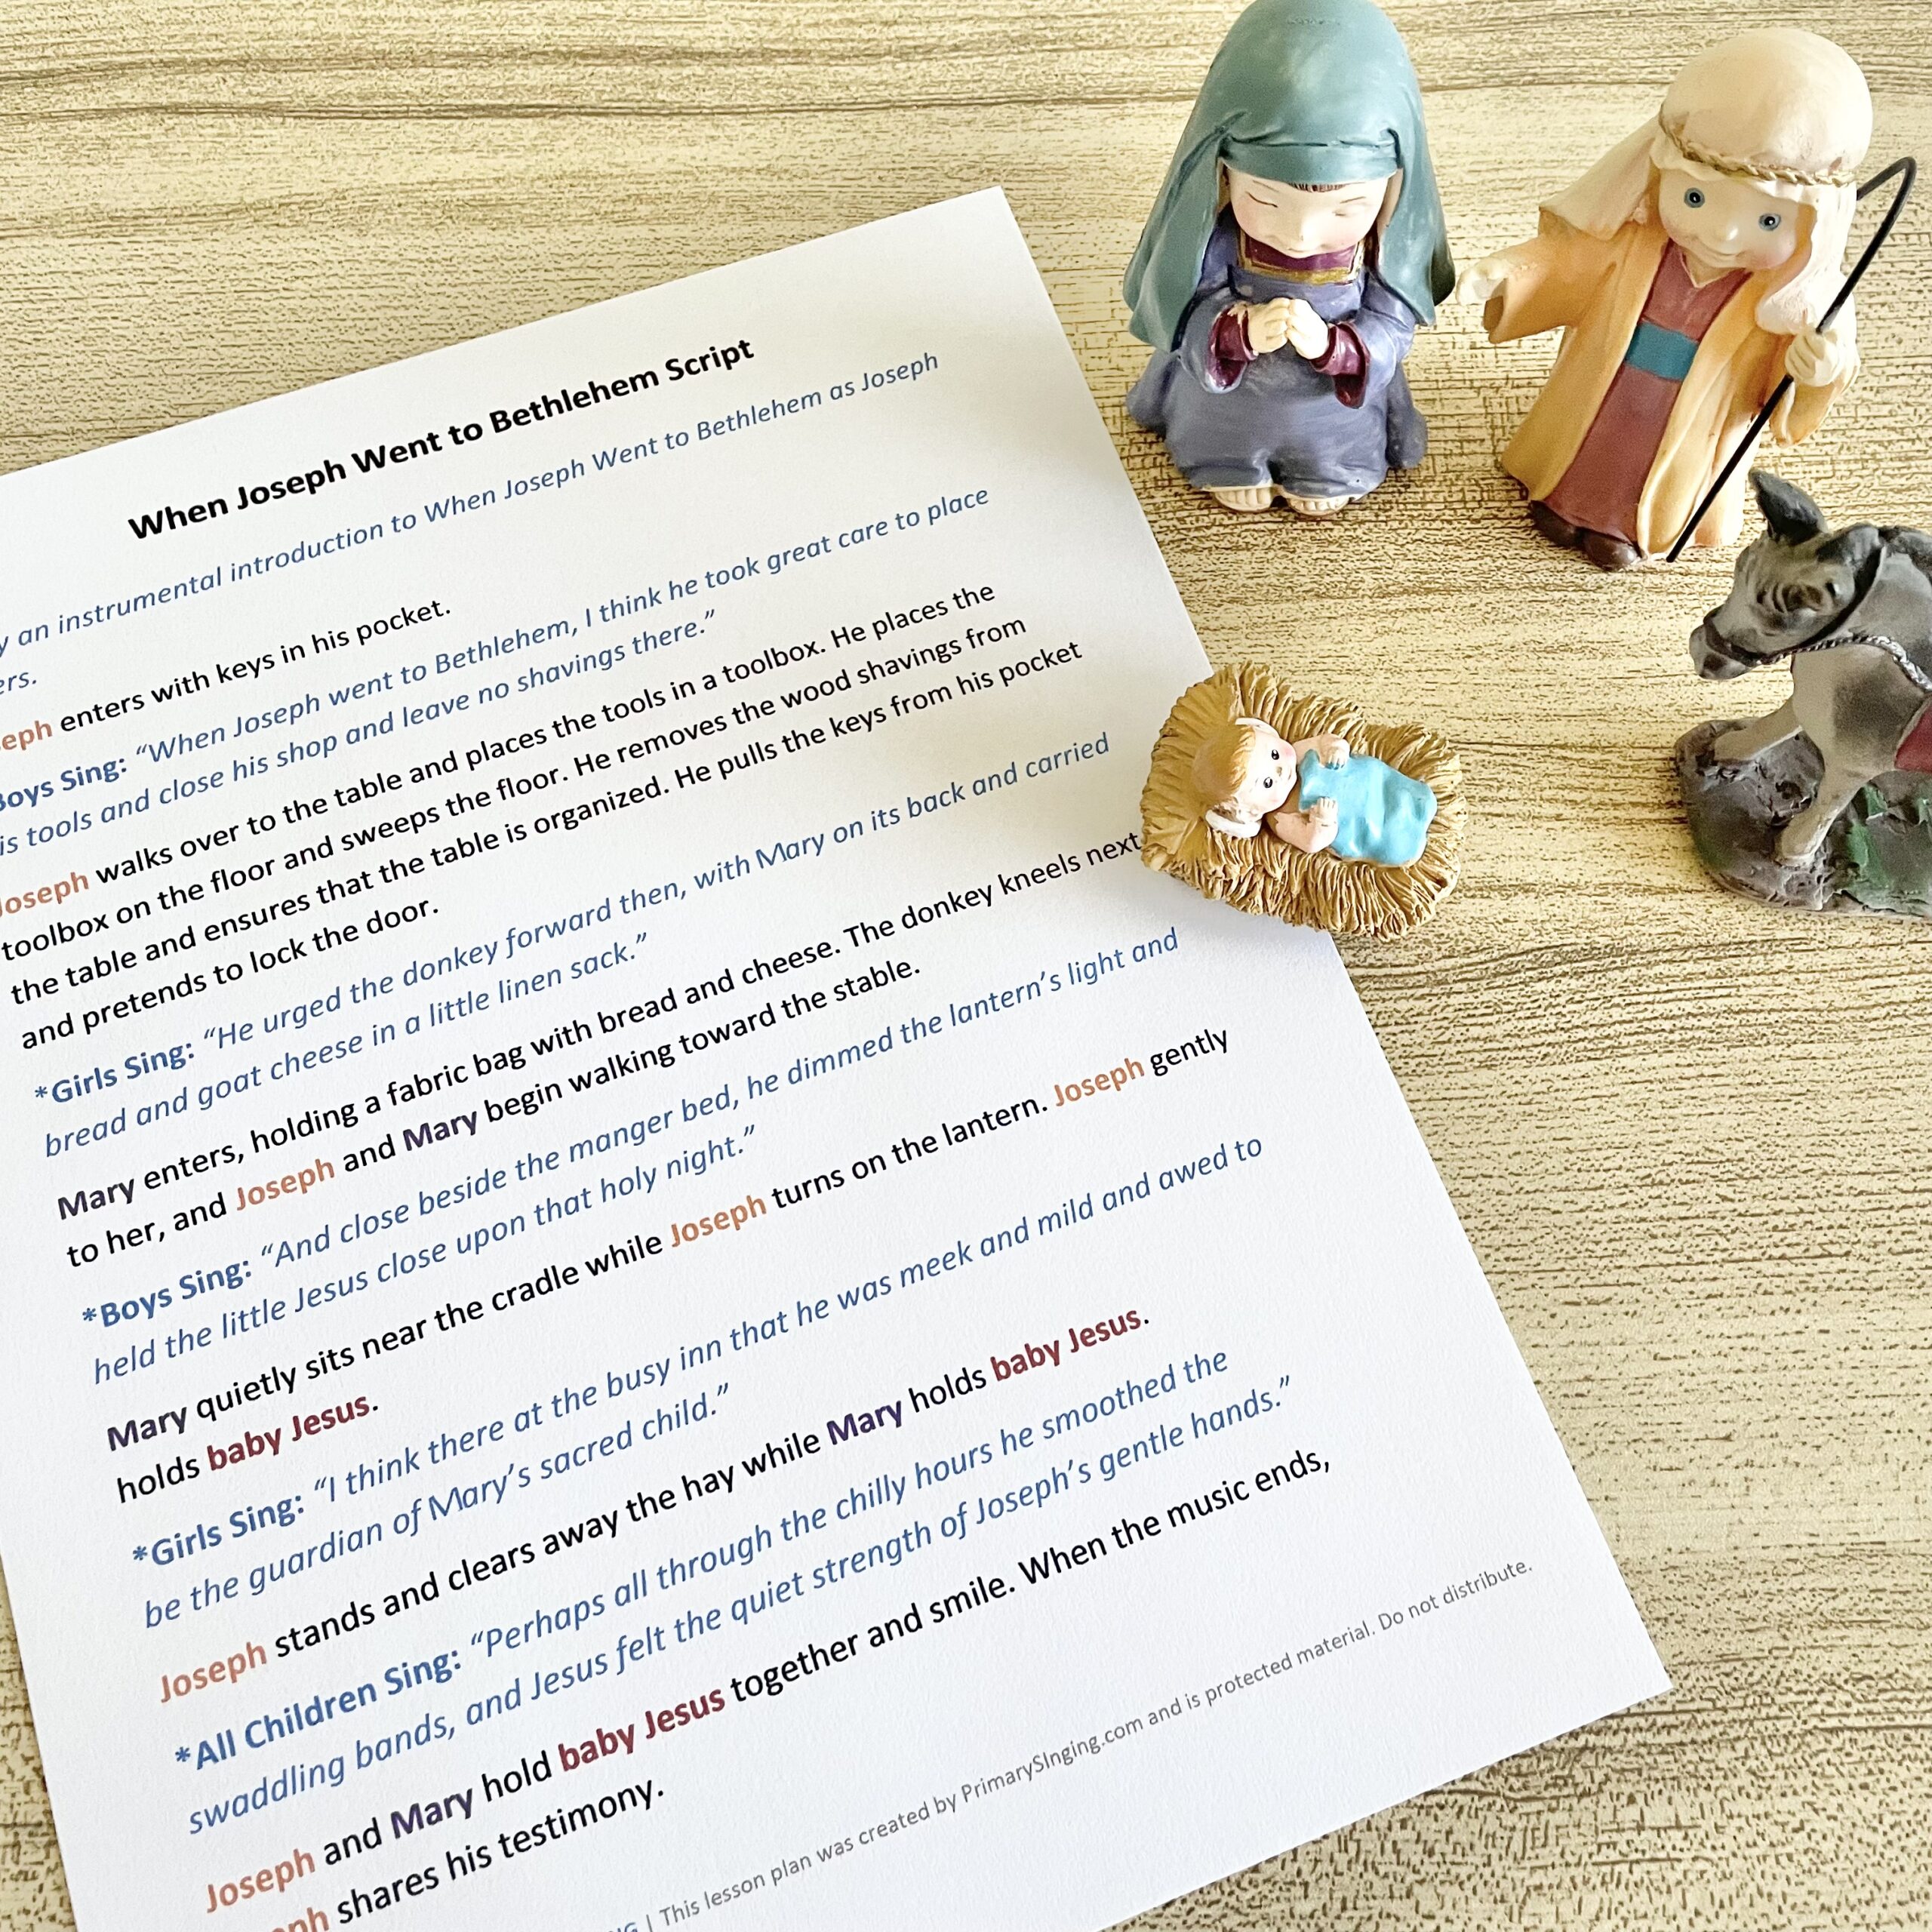 When Joseph Went to Bethlehem Sing & Act Skit - use this simple script to act out this Christmas song in primary or share with your ward. Includes printable script with costumes ideas, props, and additional song helps for LDS Primary Music Leaders.